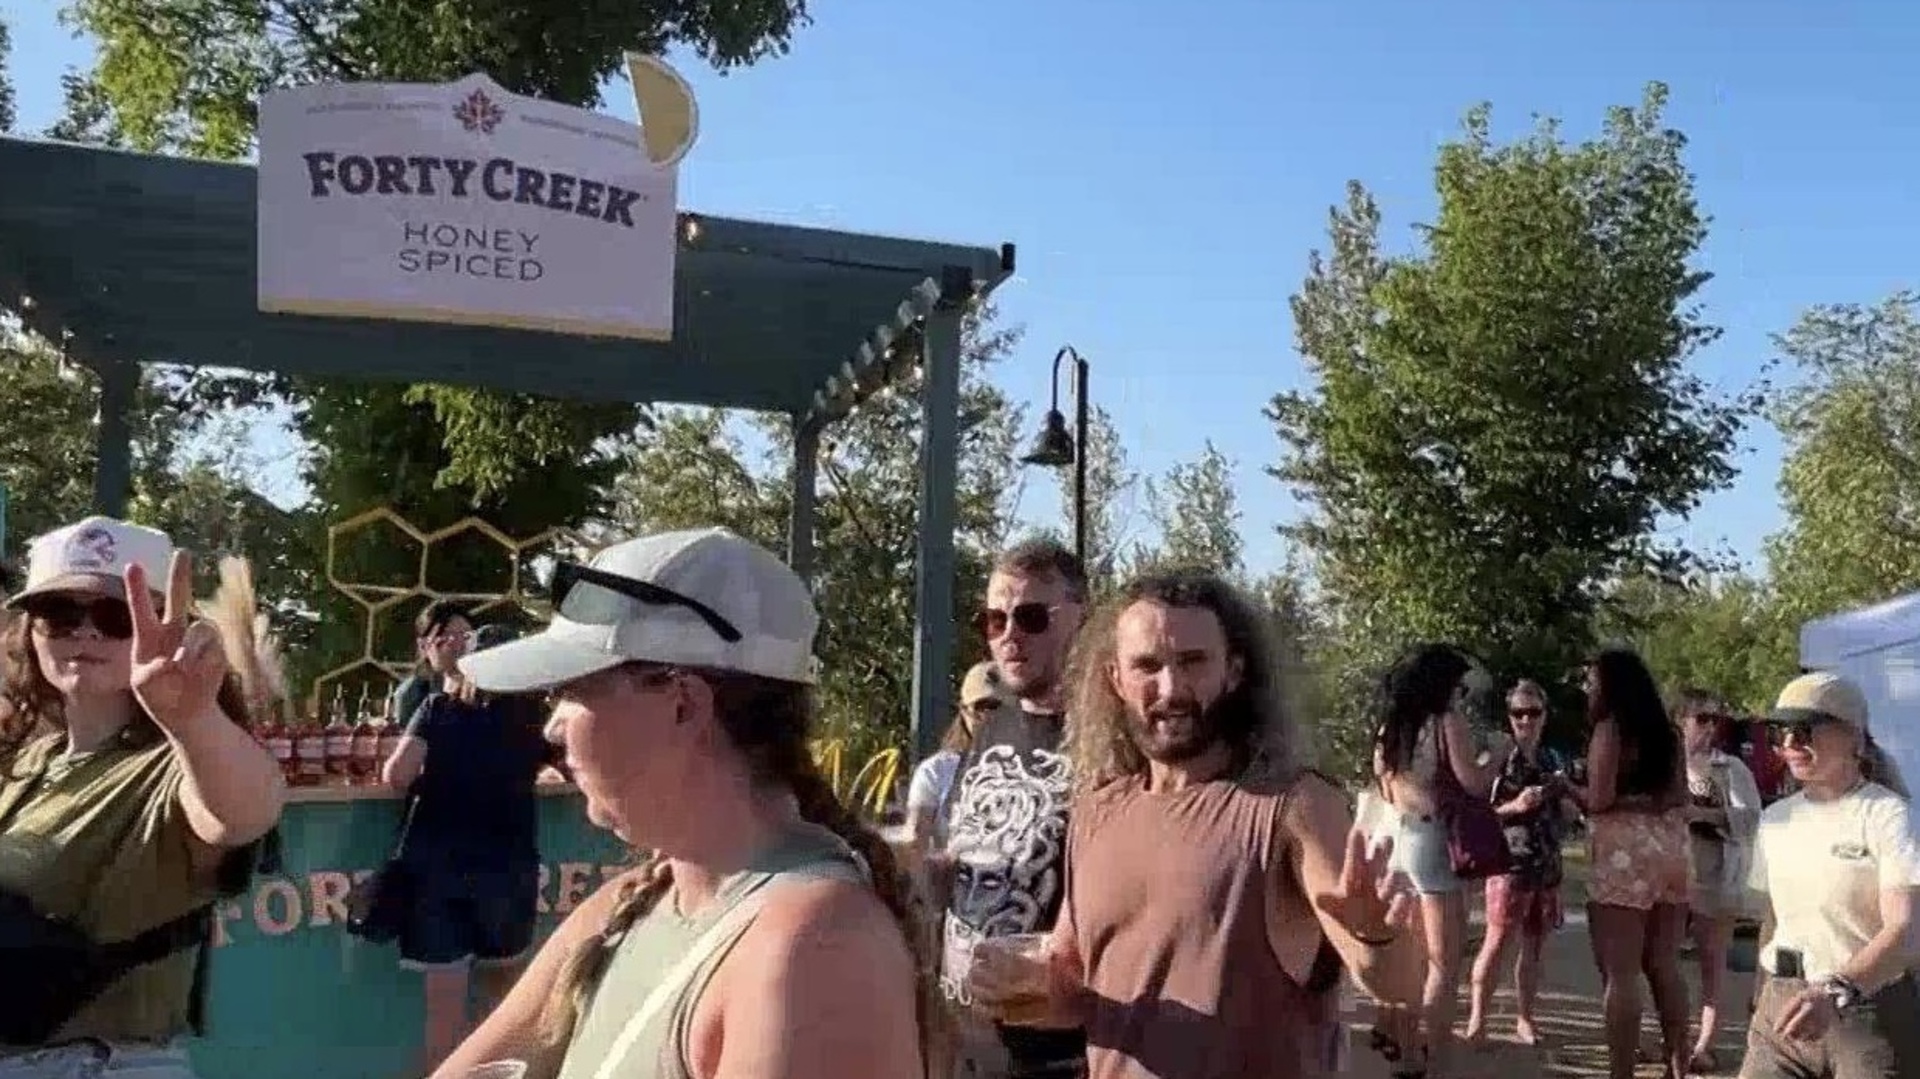 More people, more freedom: Taste of Calgary returns to Lot 6